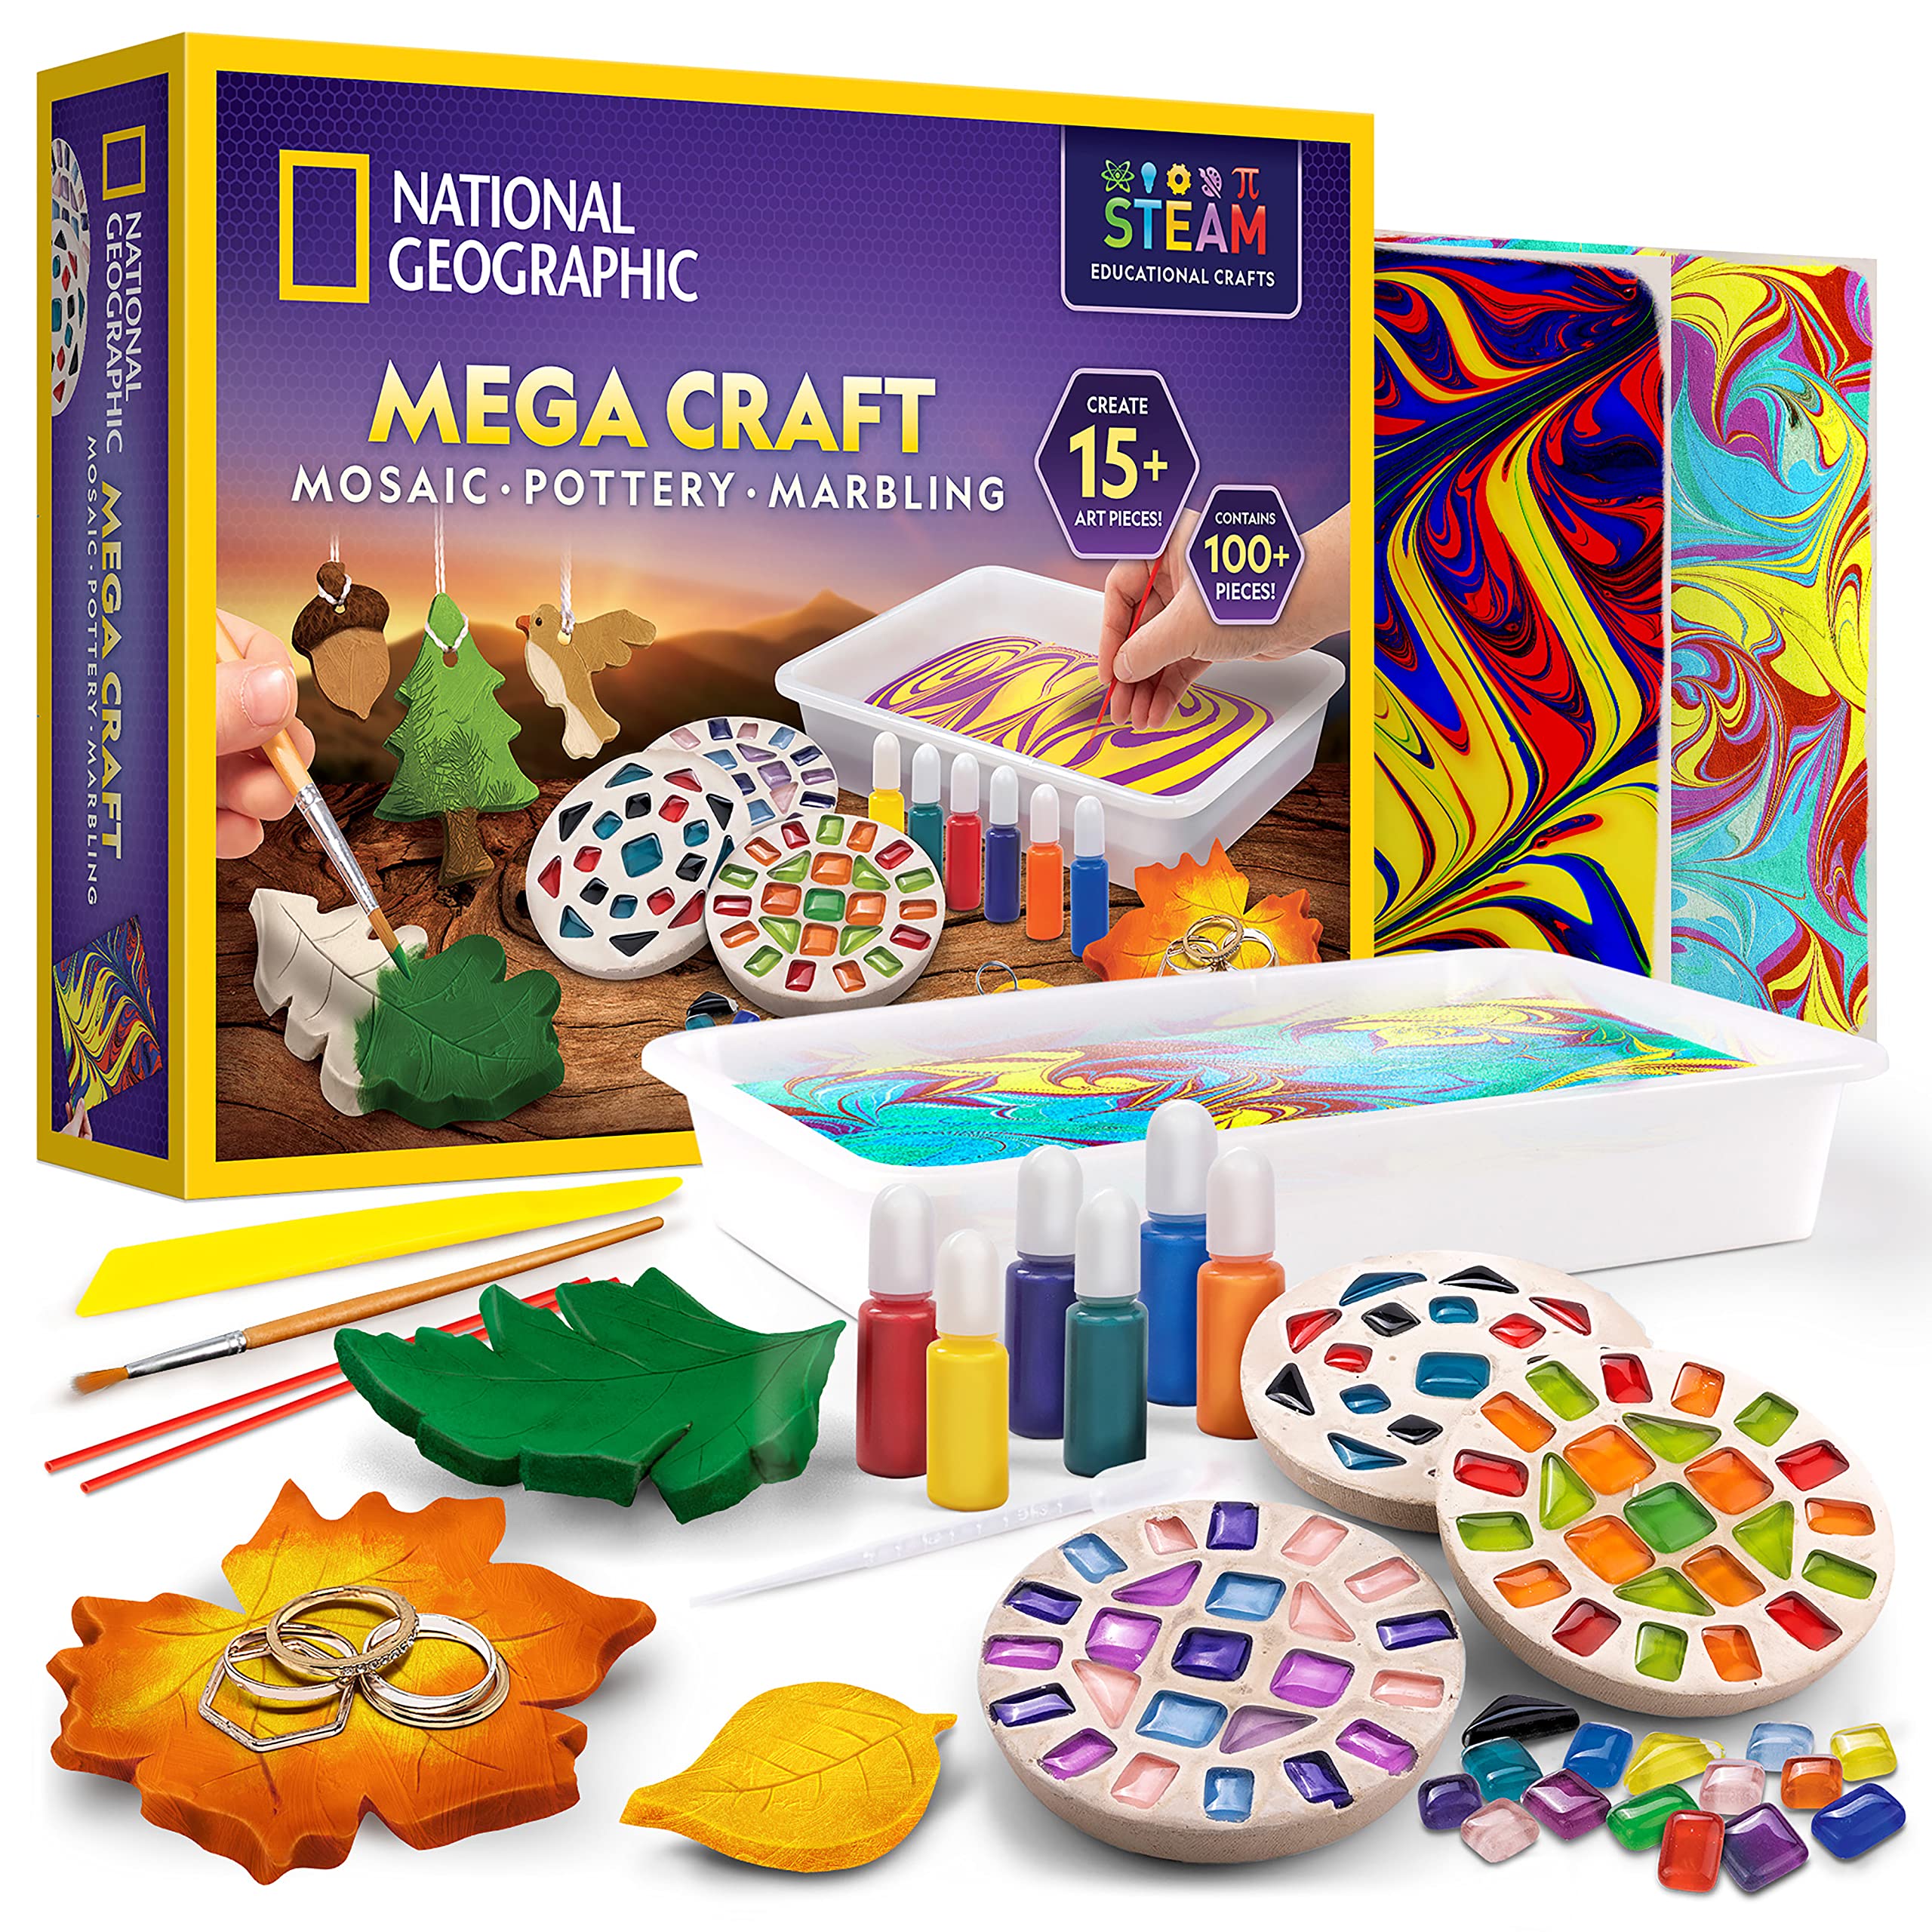 NATIONAL GEOGRAPHIC Mega Arts and Crafts Kit for Kids – Mosaic Kit, Marbling Paint Kit & Air Dry Clay Pottery Kit – Art Projects for Kids Ages 8-12, Crafts for Girls and Boys (Amazon Exclusive)